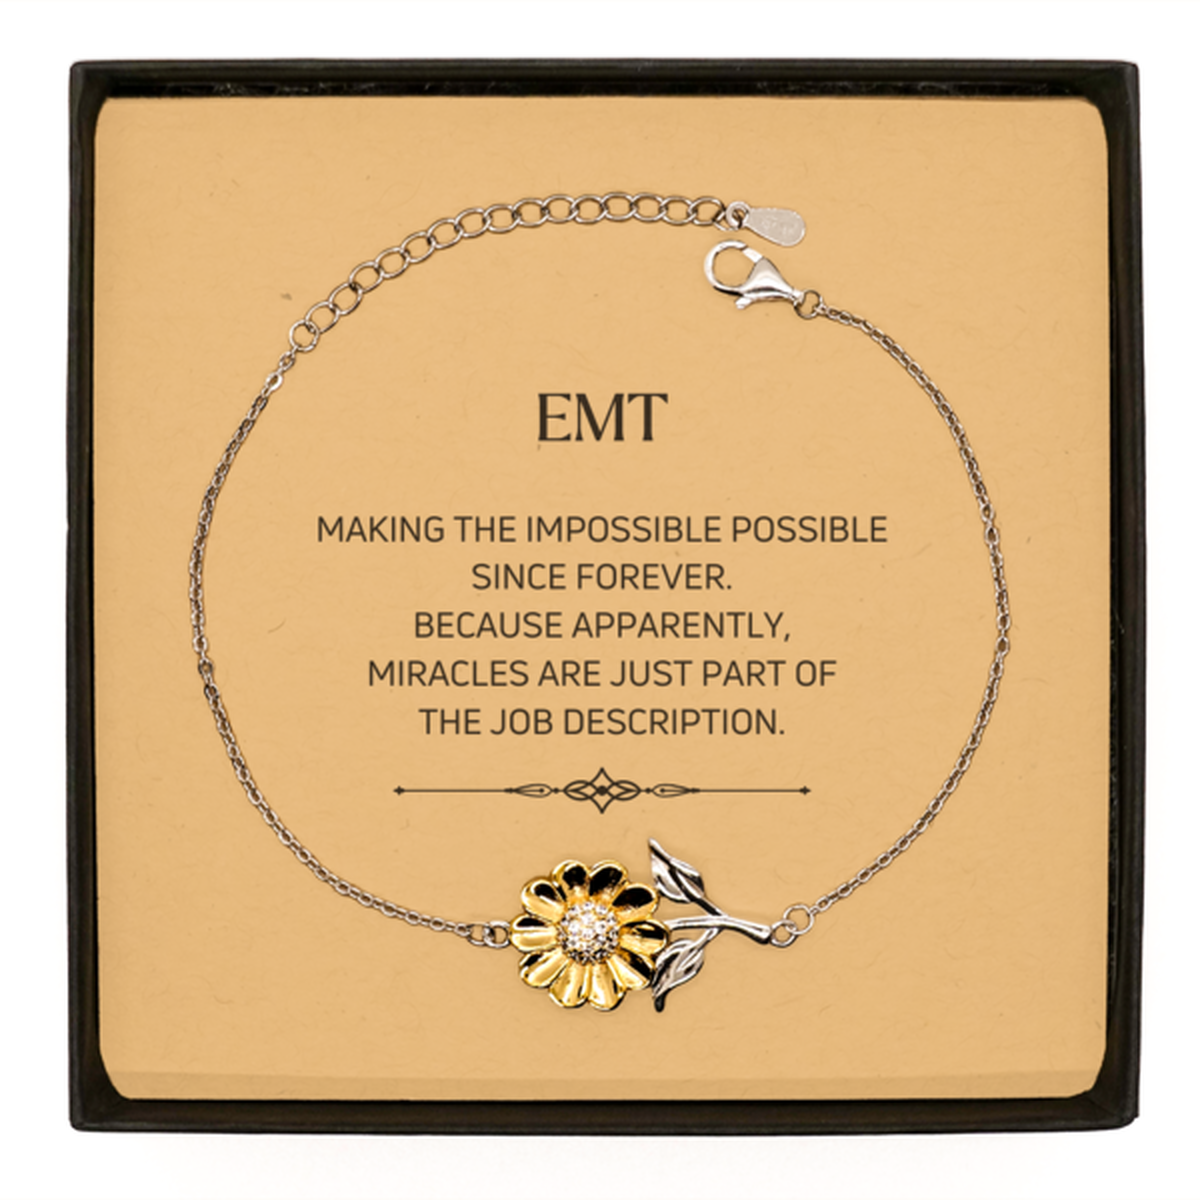 Funny EMT Gifts, Miracles are just part of the job description, Inspirational Birthday Sunflower Bracelet For EMT, Men, Women, Coworkers, Friends, Boss